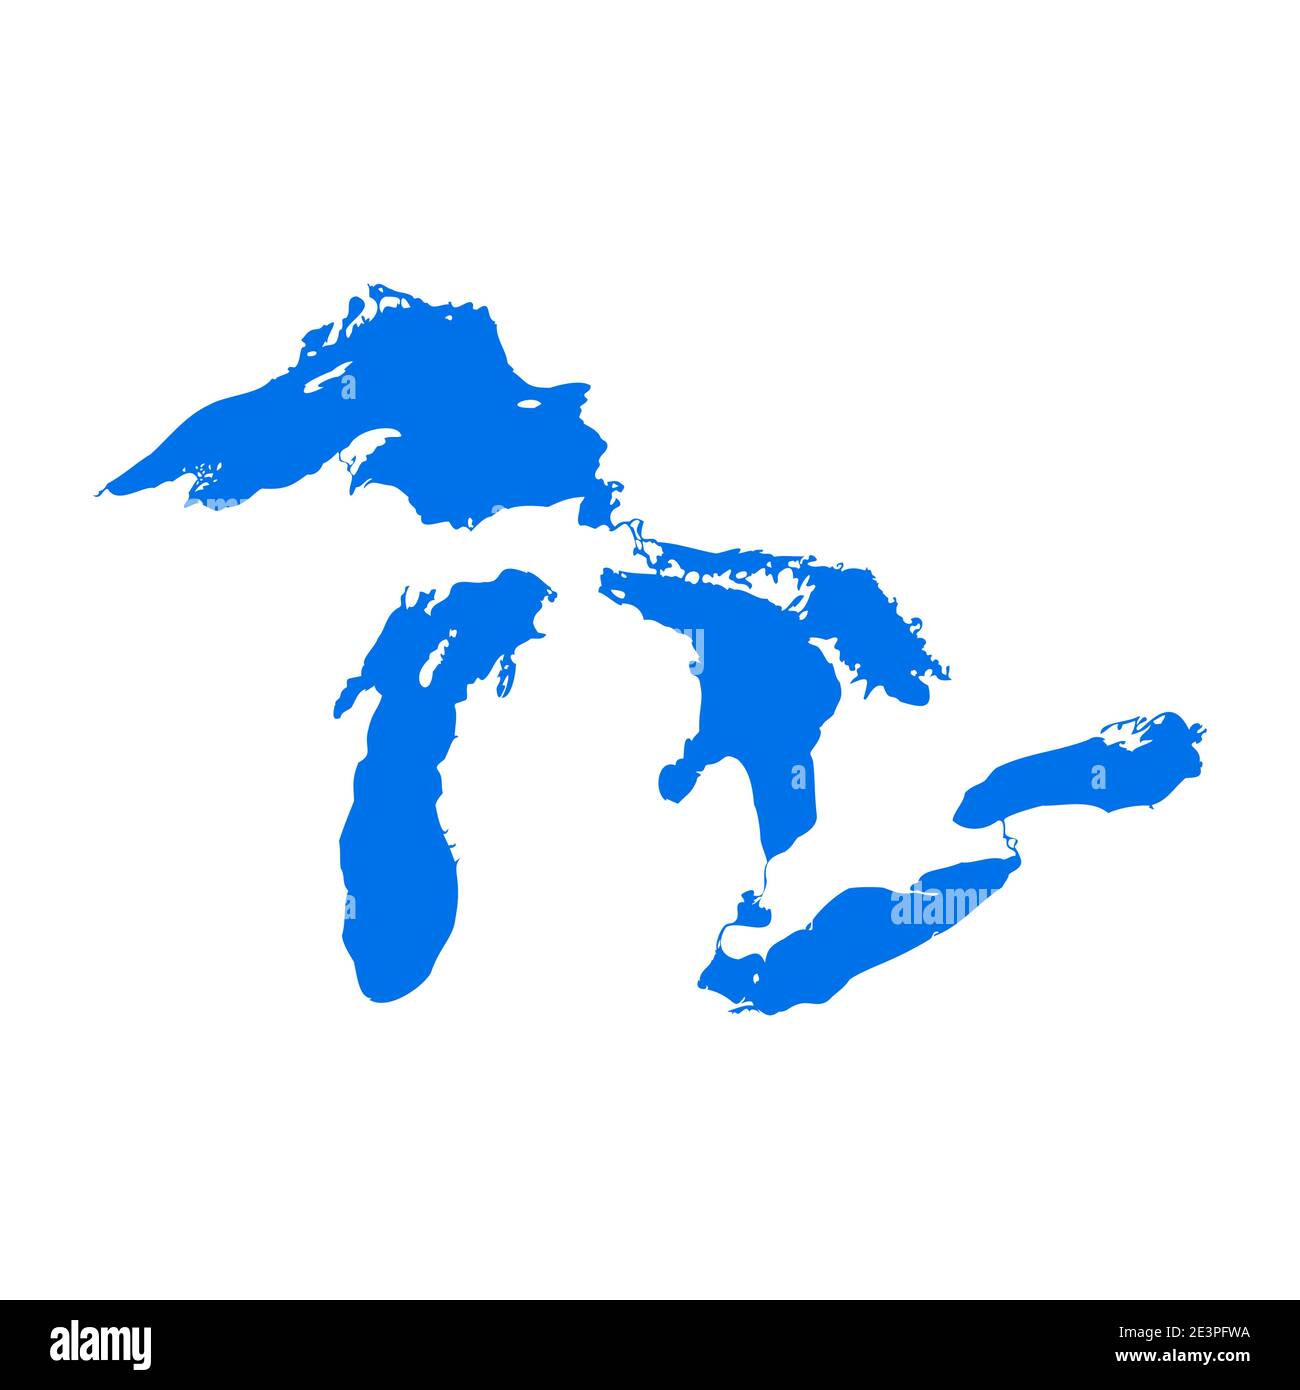 Great lakes map michigan superior vector silhouette abstract illustration map Stock Vector